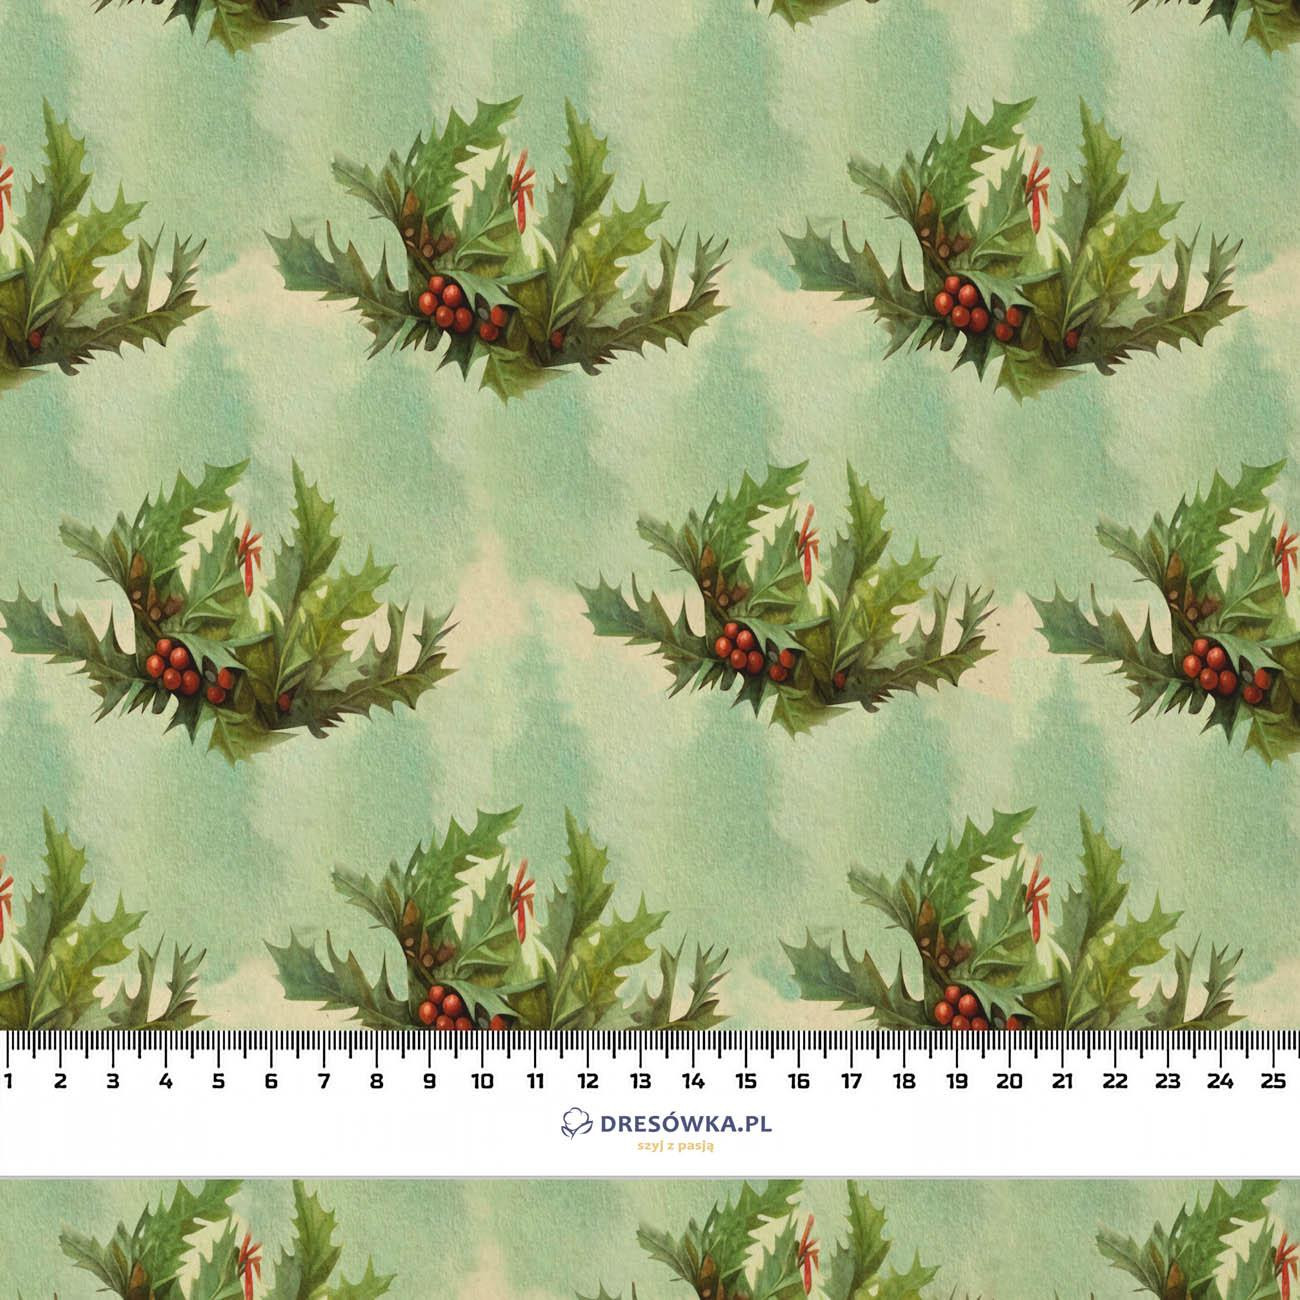 VINTAGE CHRISTMAS PAT. 4 - quick-drying woven fabric